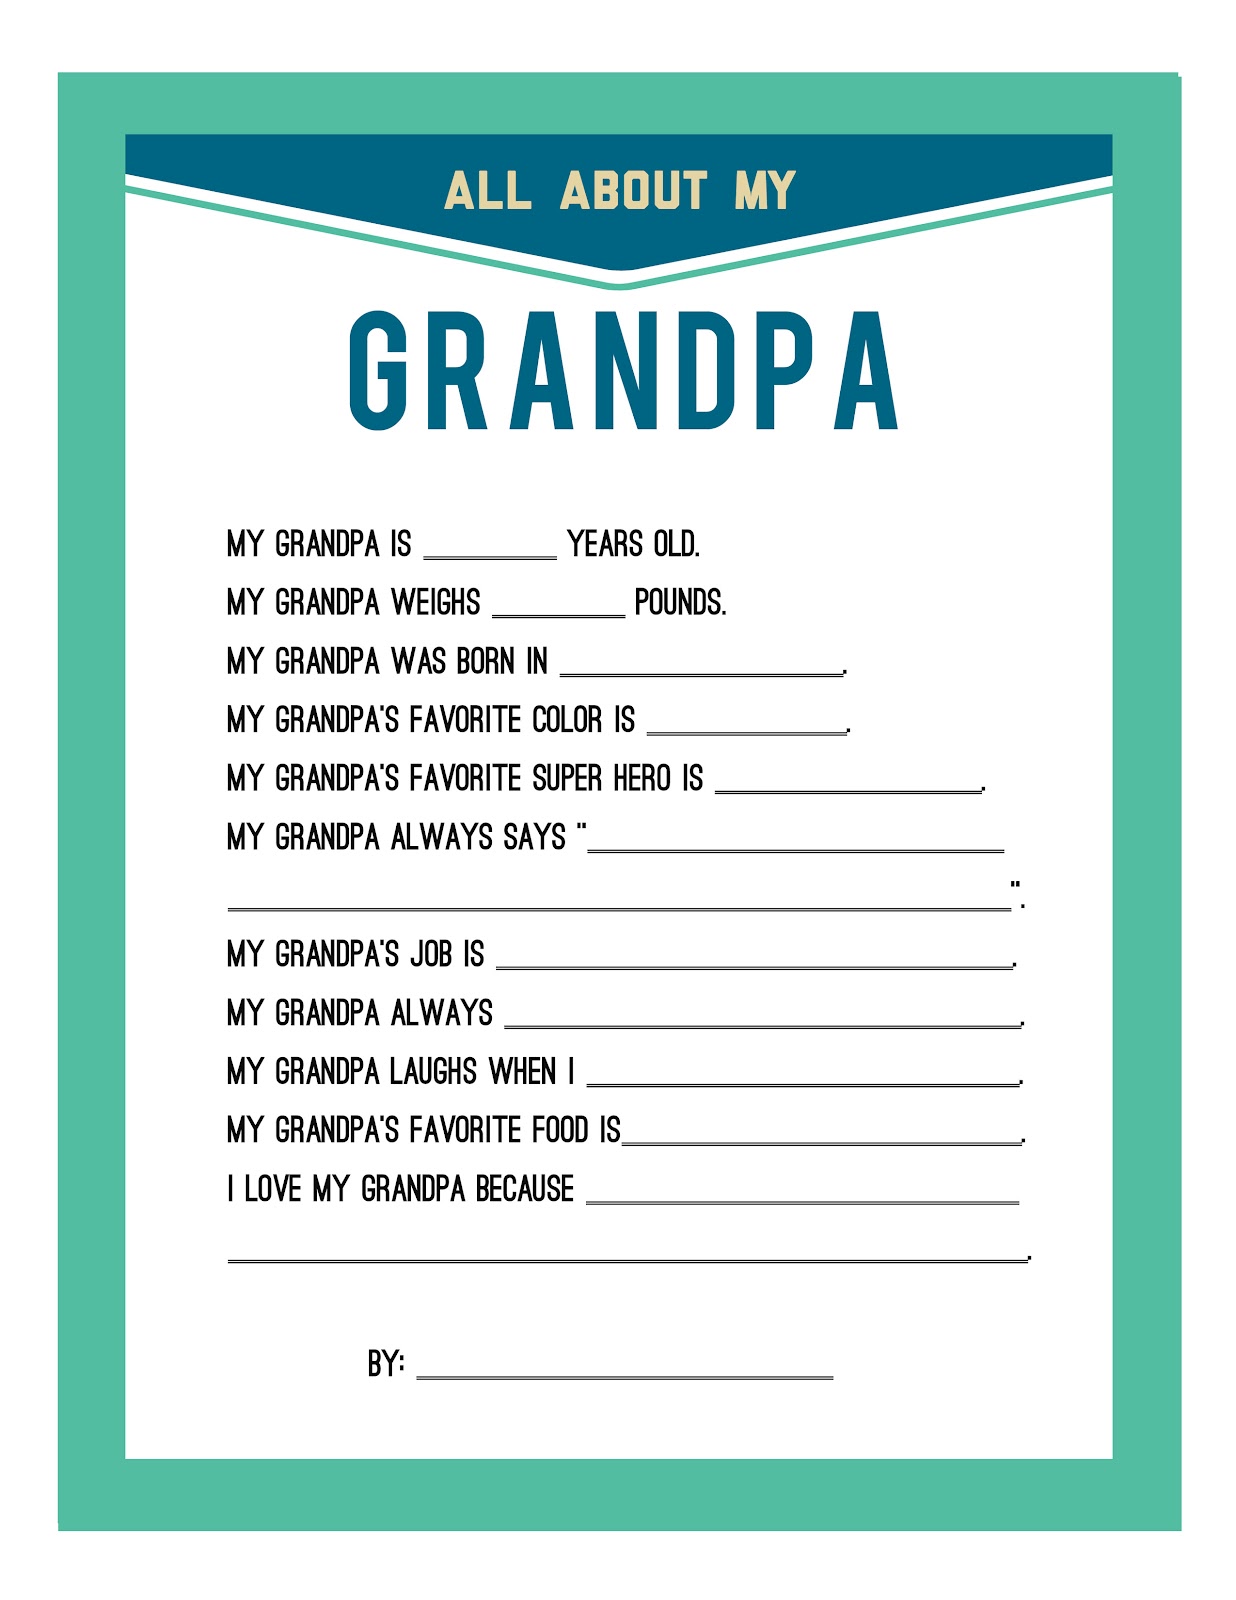 Free Father S Day Printable